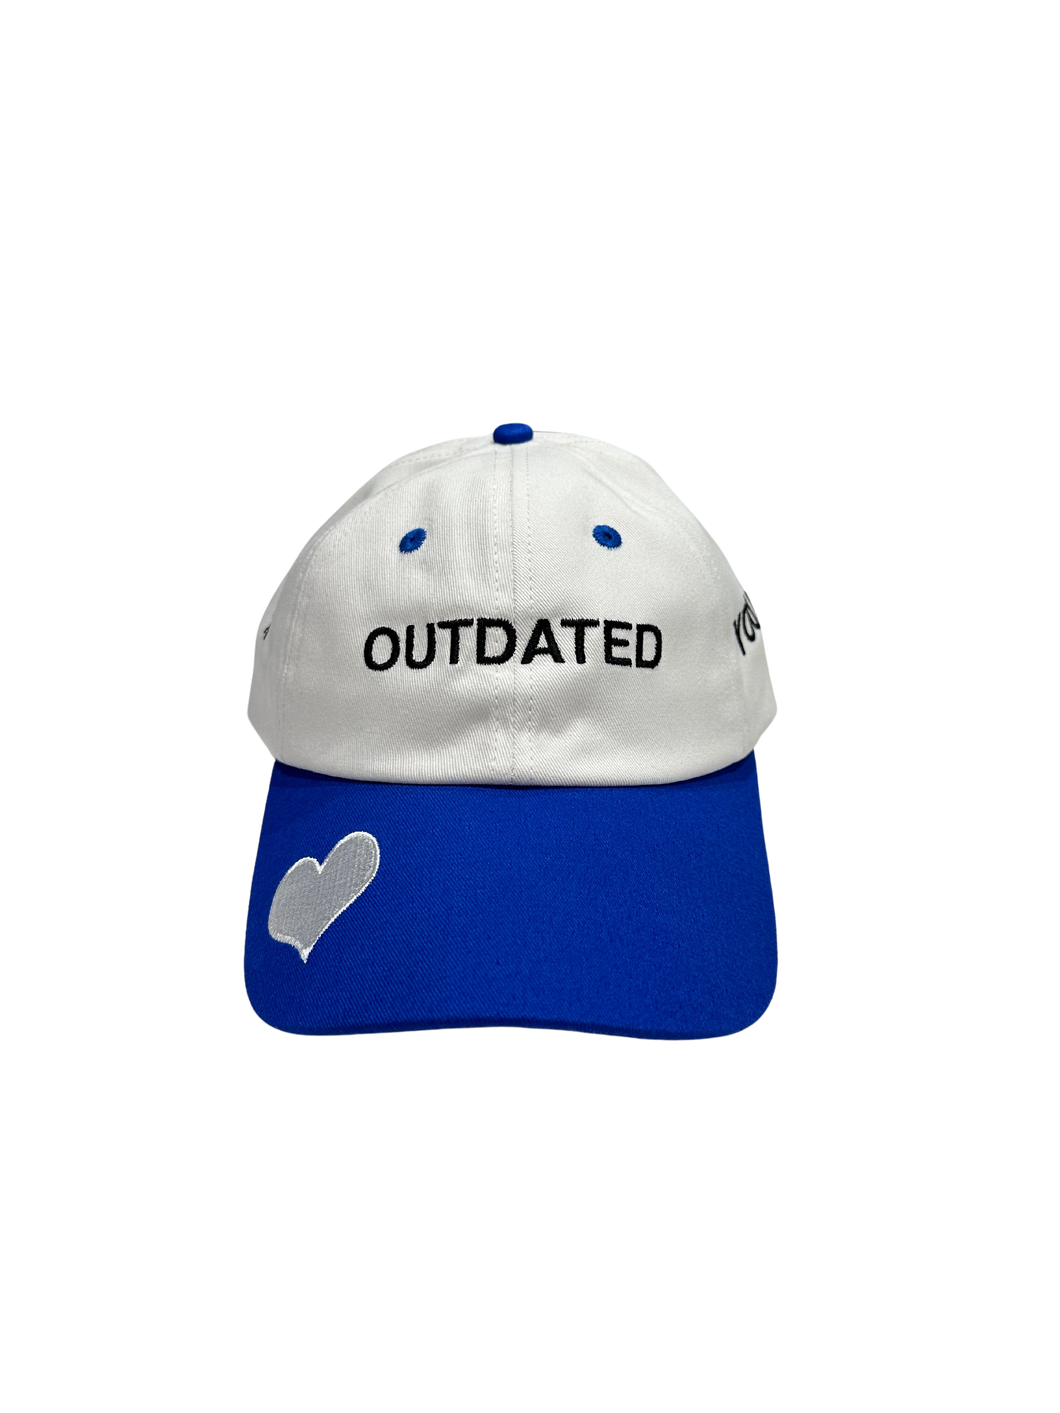 Outdated love cap